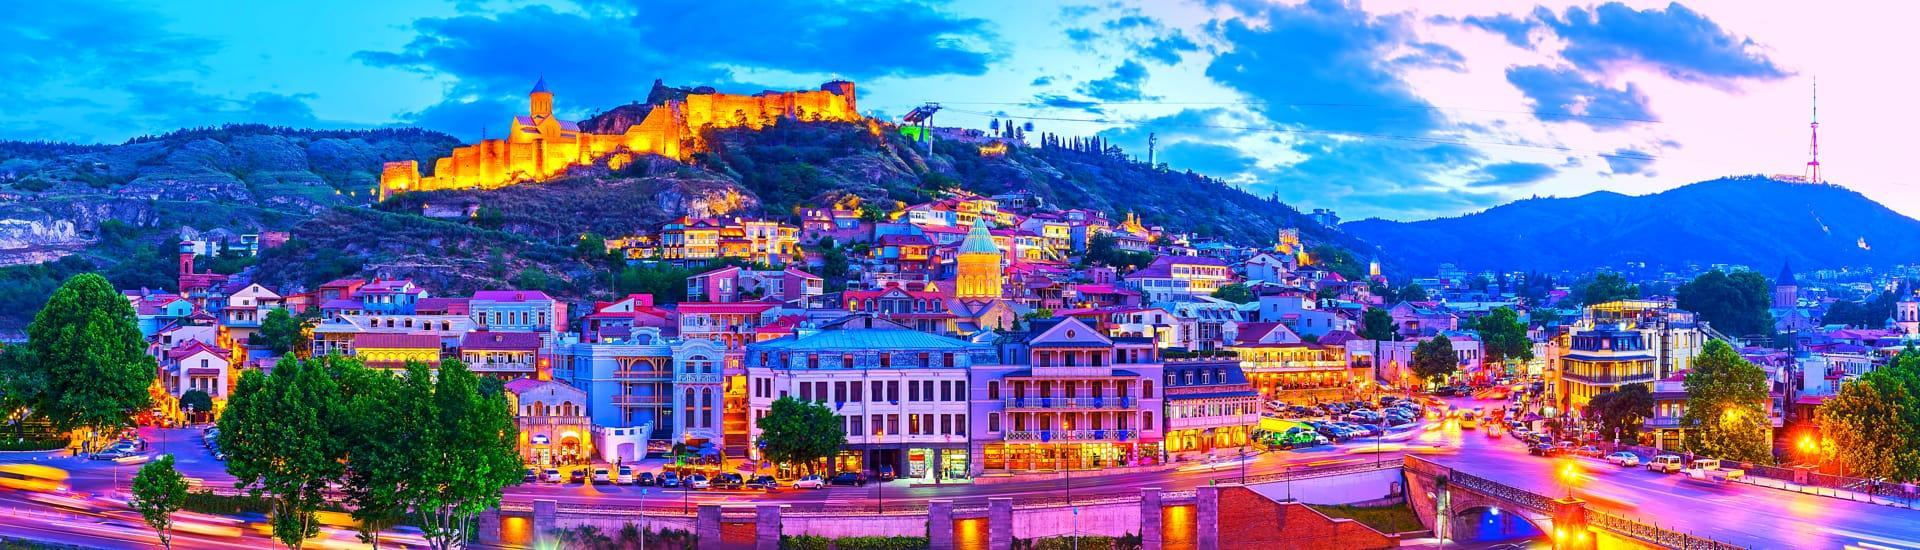 Find and Book Any Hotel in Tbilisi City